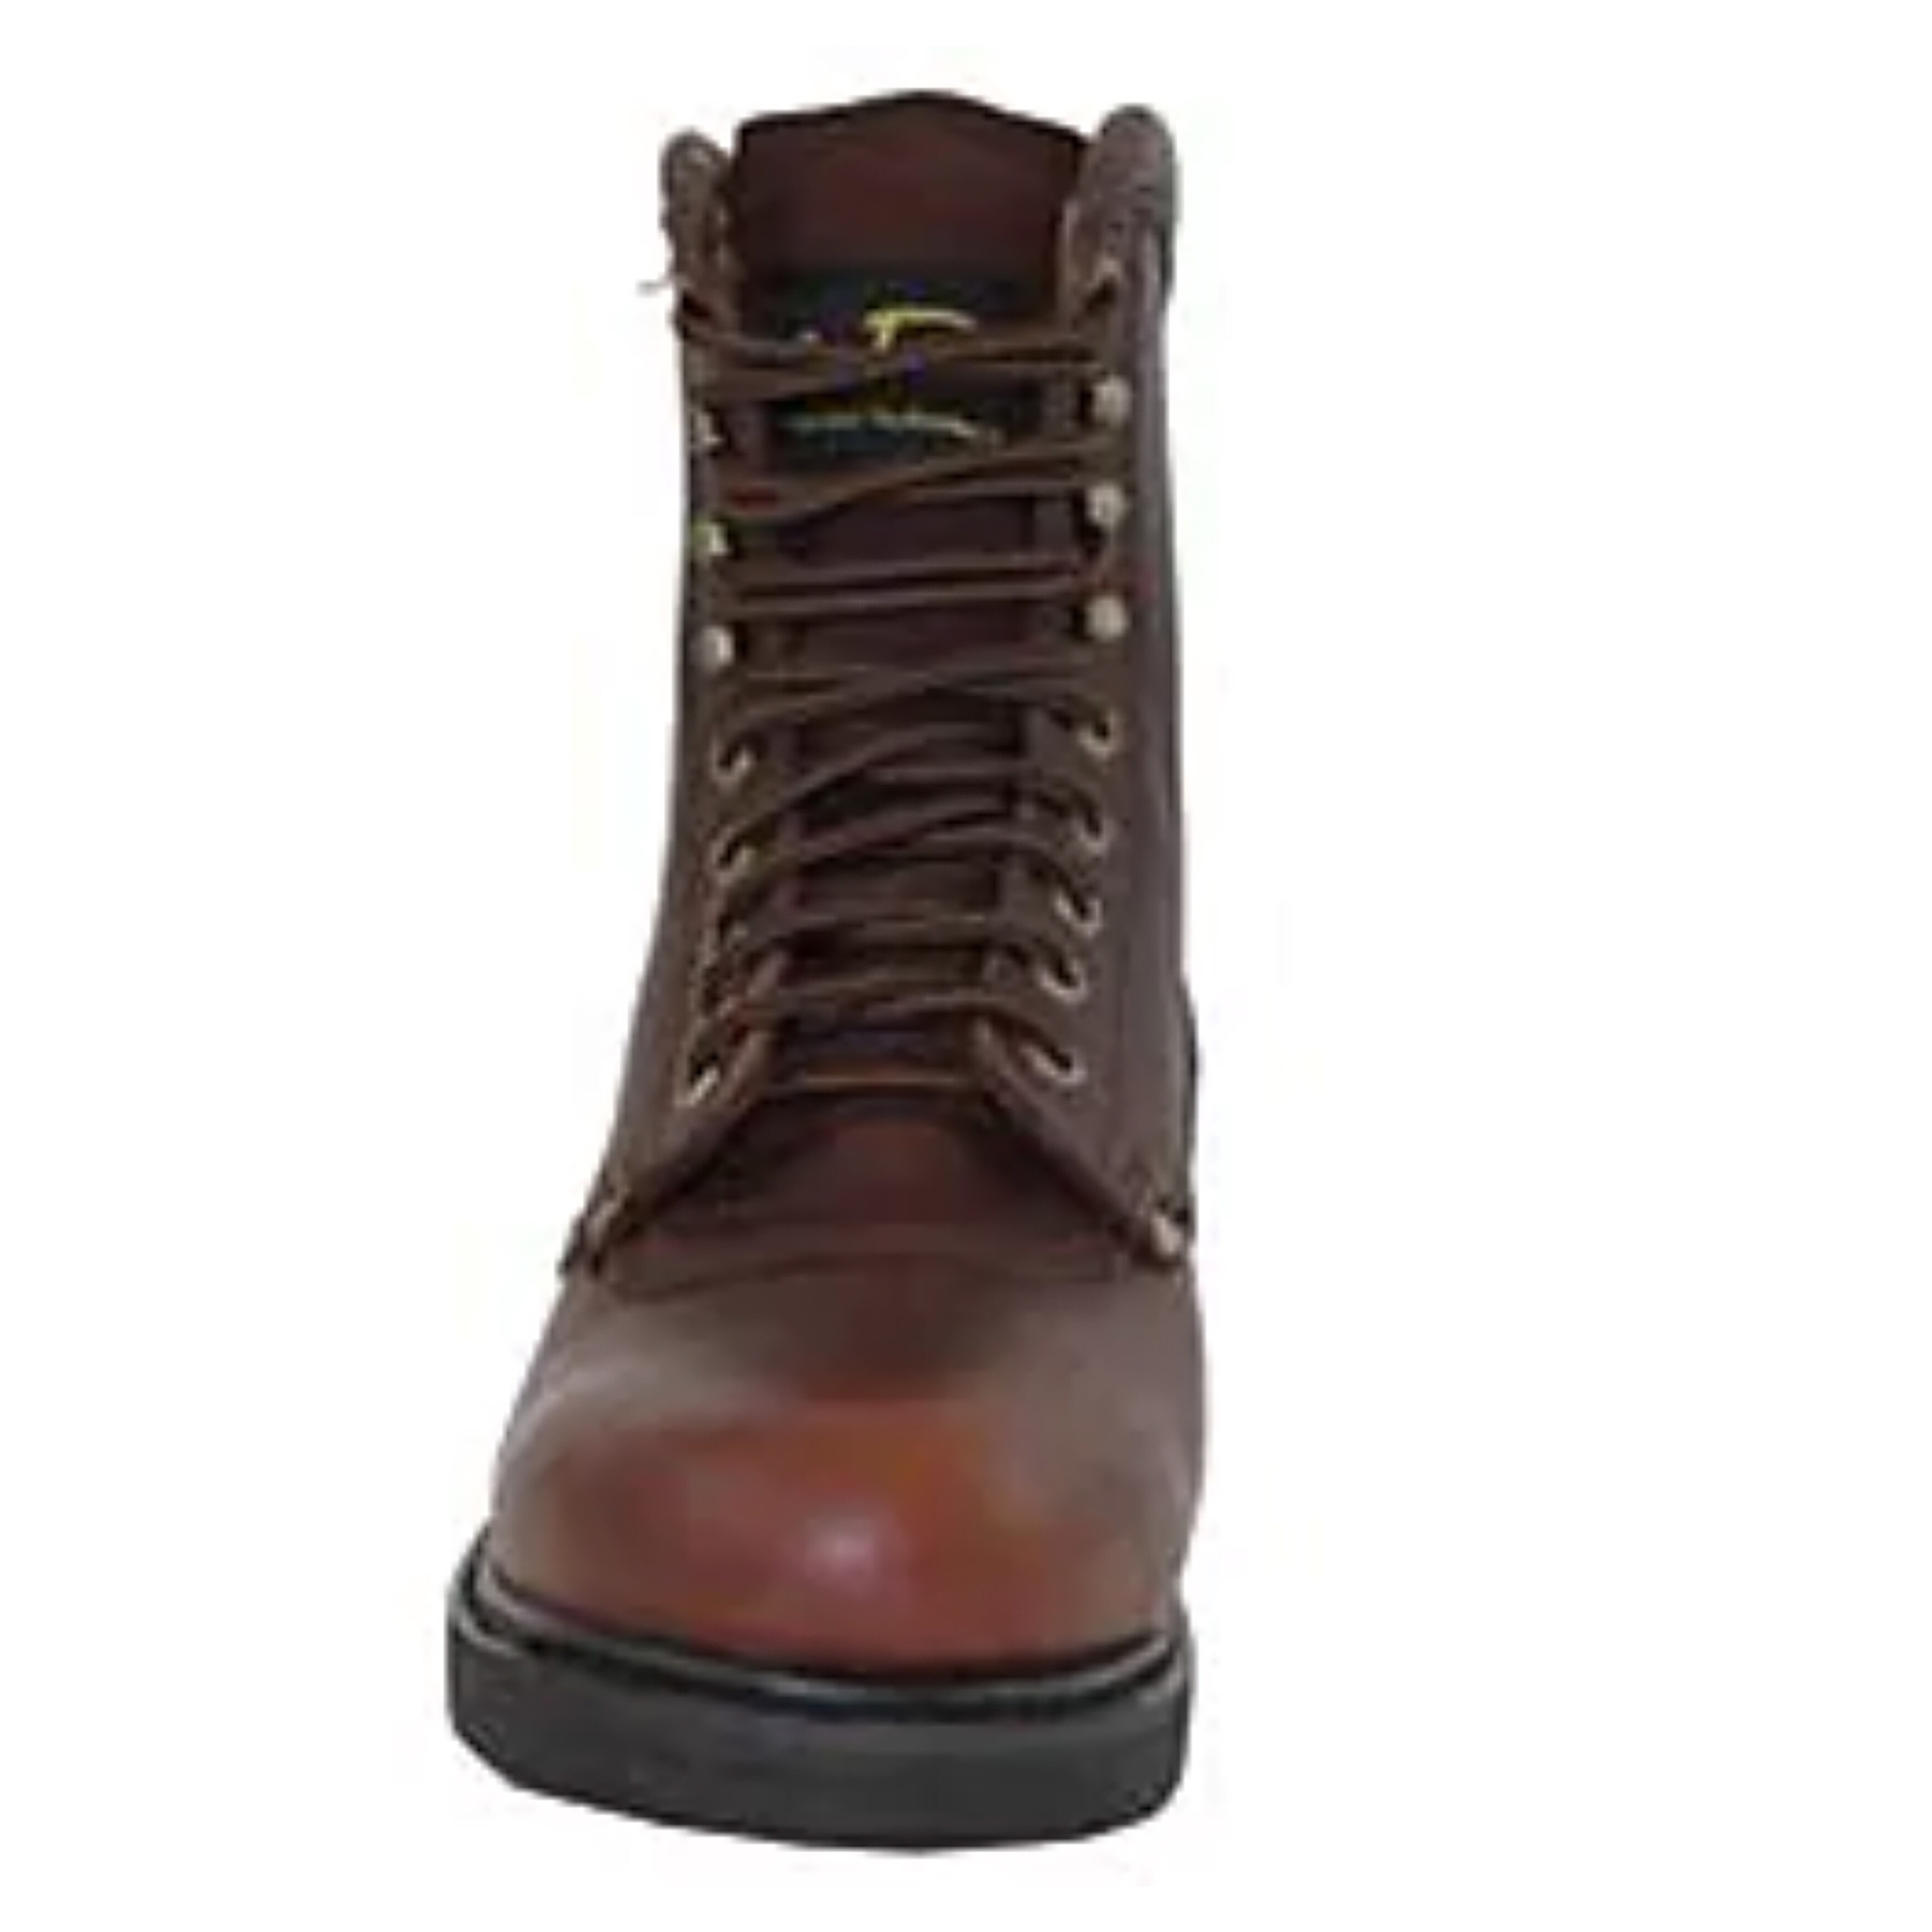 8 inch leather hiking boots